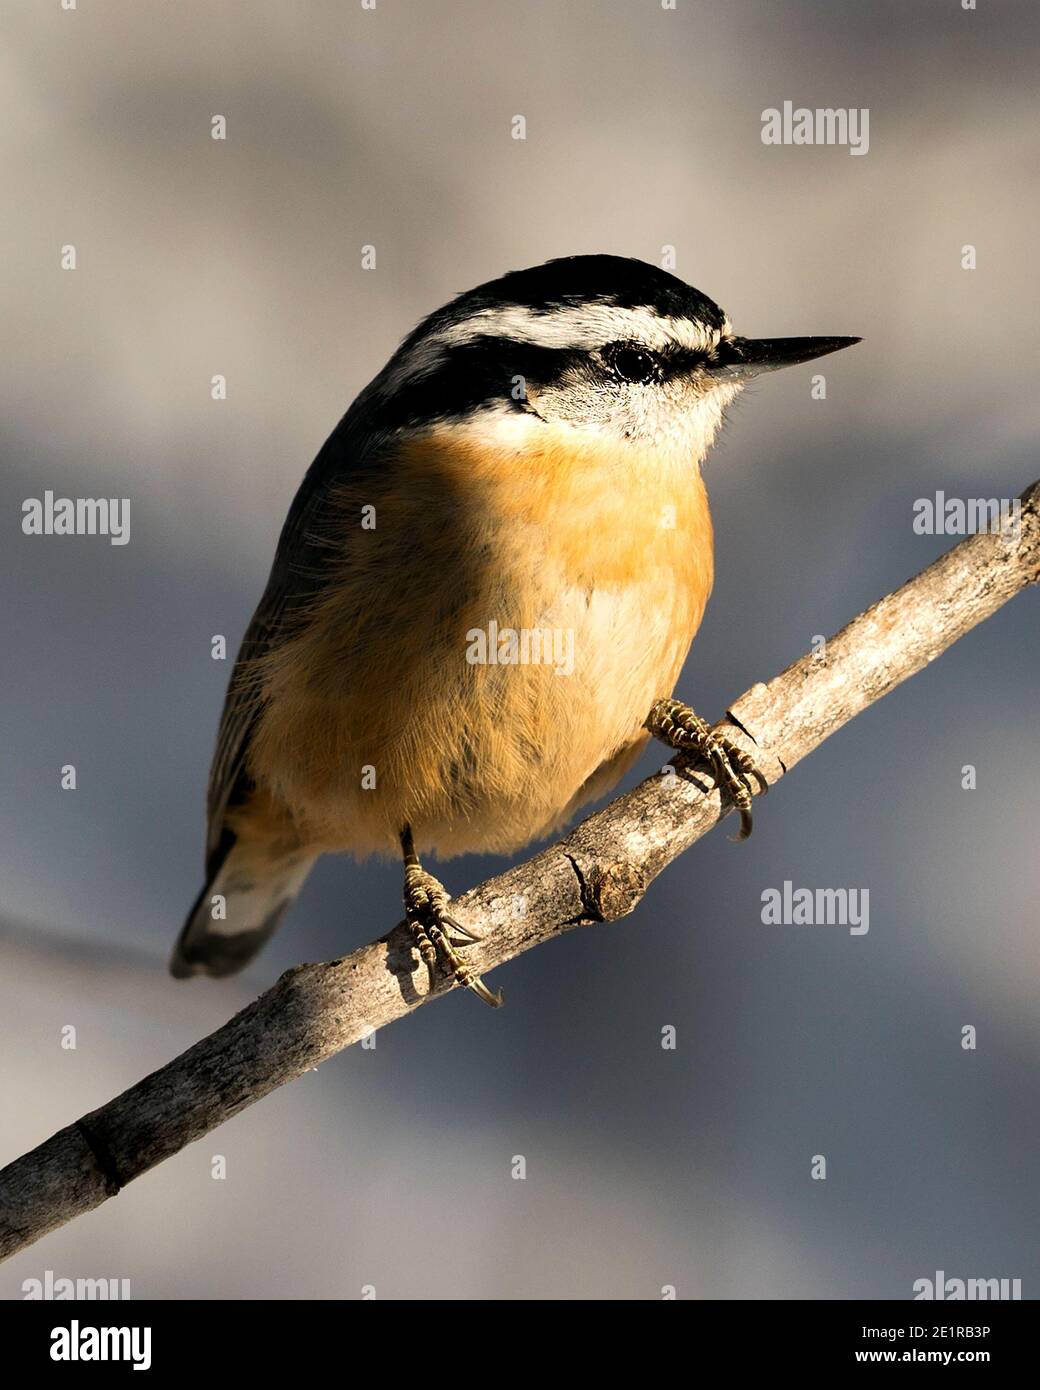 Nuthatch close-up profile view perched on a tree branch in its environment and habitat with a blur background, displaying feather plumage. Image. Stock Photo